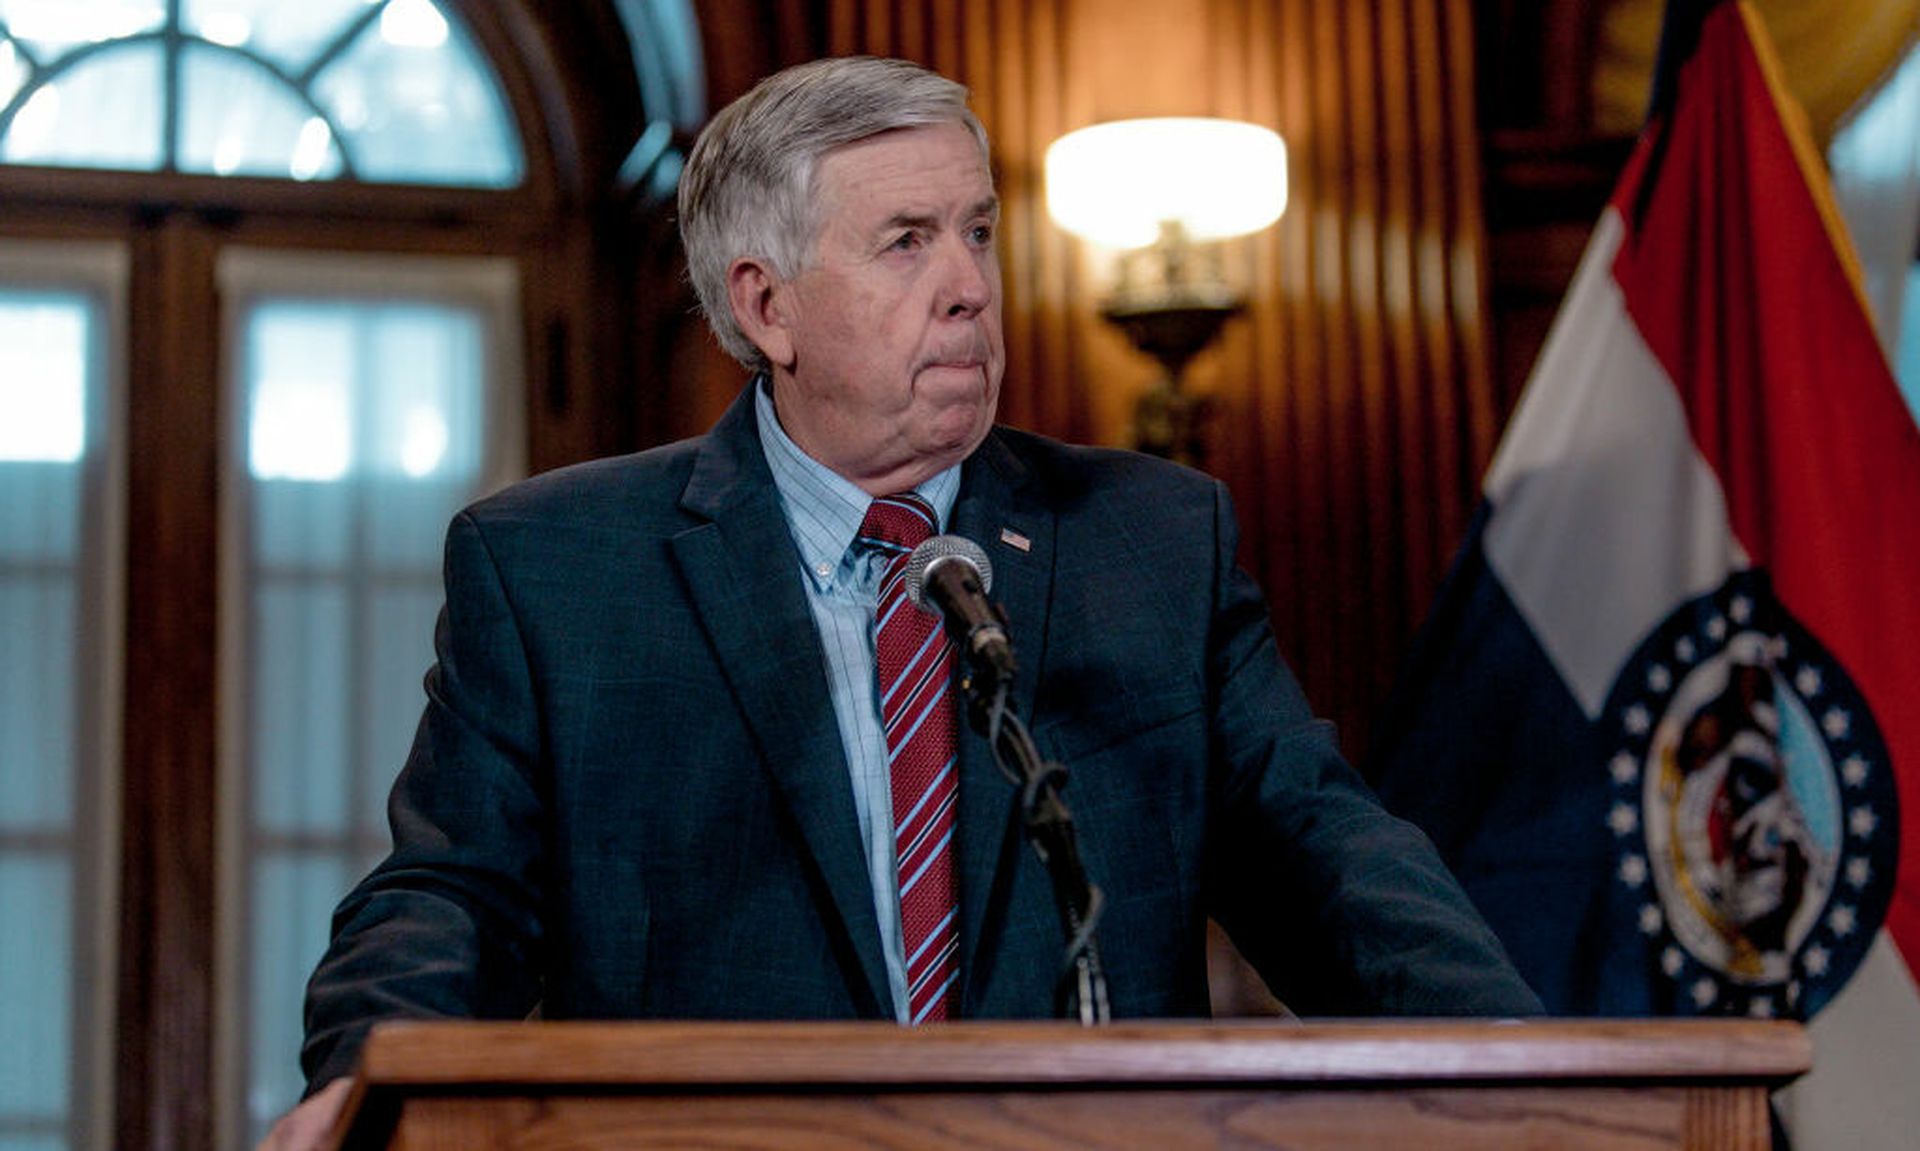 Gov. Mike Parson, seen here in May 29, 2019 in Jefferson City, Mo, raised legal and ethical questions about responsible disclosure in October. (Photo by Jacob Moscovitch/Getty Images)